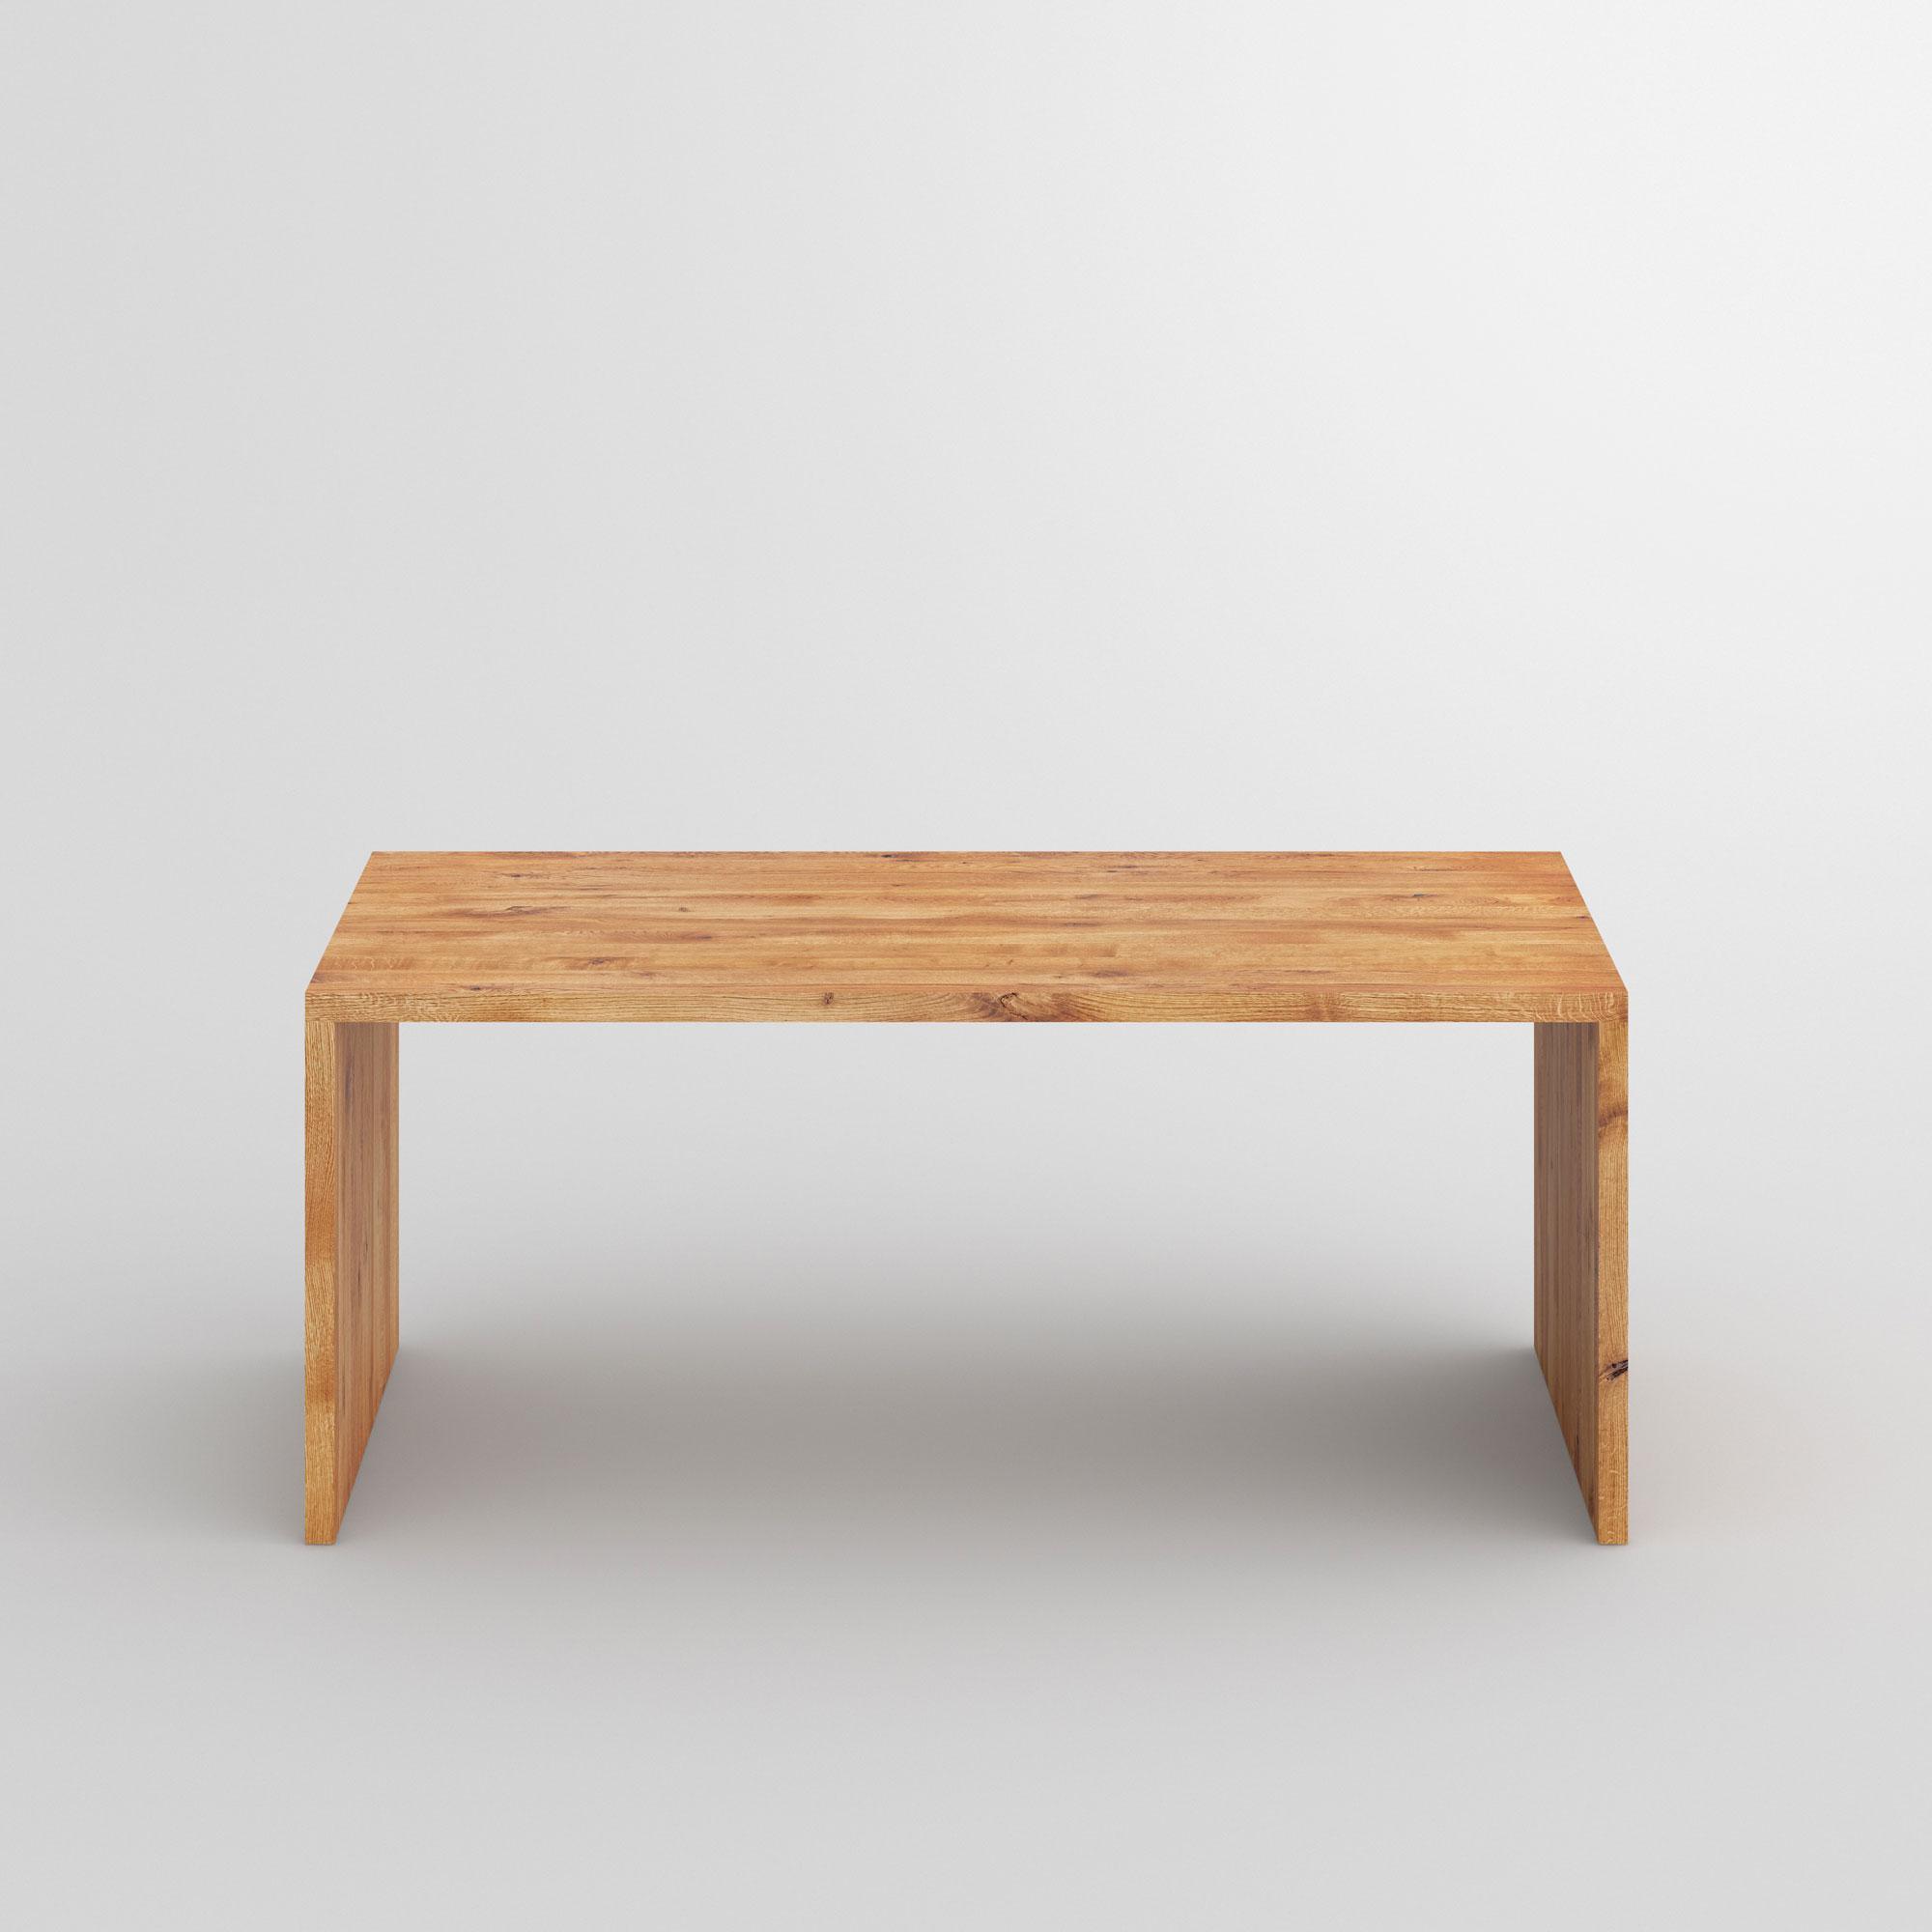 Gable Table MENA cam2 custom made in solid wood by vitamin design